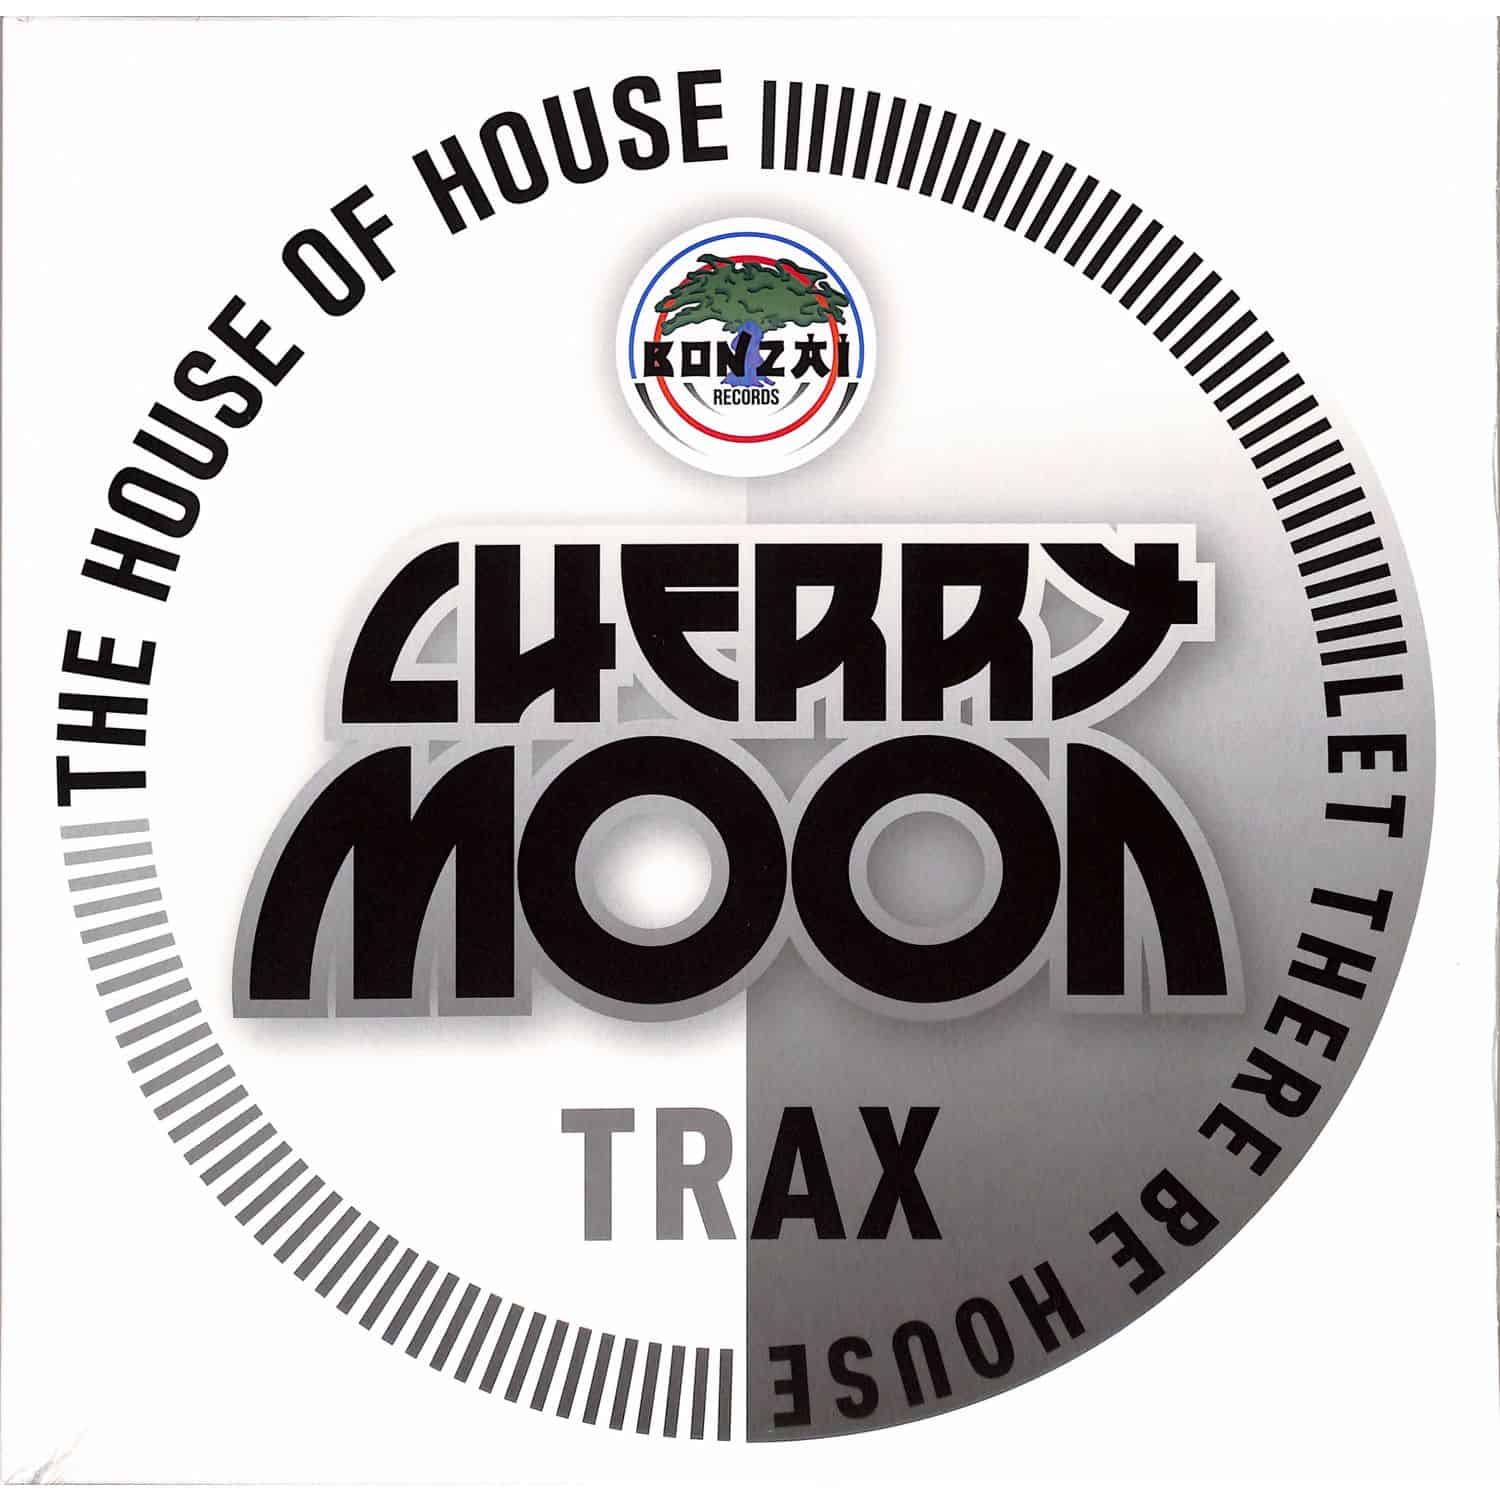 Cherry Moon Trax - THE HOUSE OF HOUSE / LET THERE BE HOUSE 